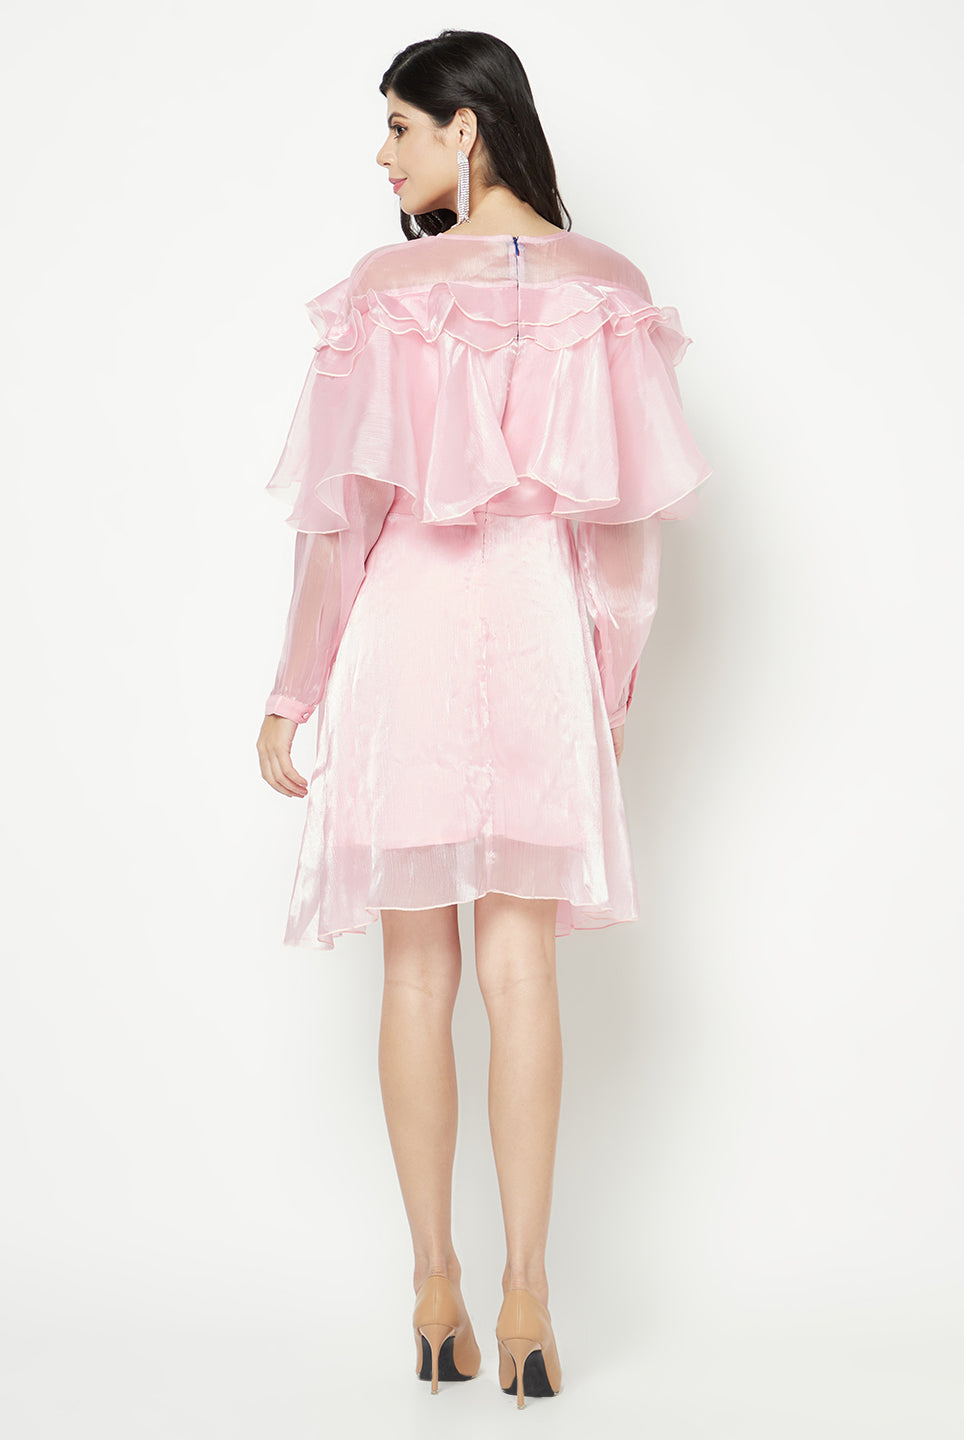 Cotton Candy Fly Dress